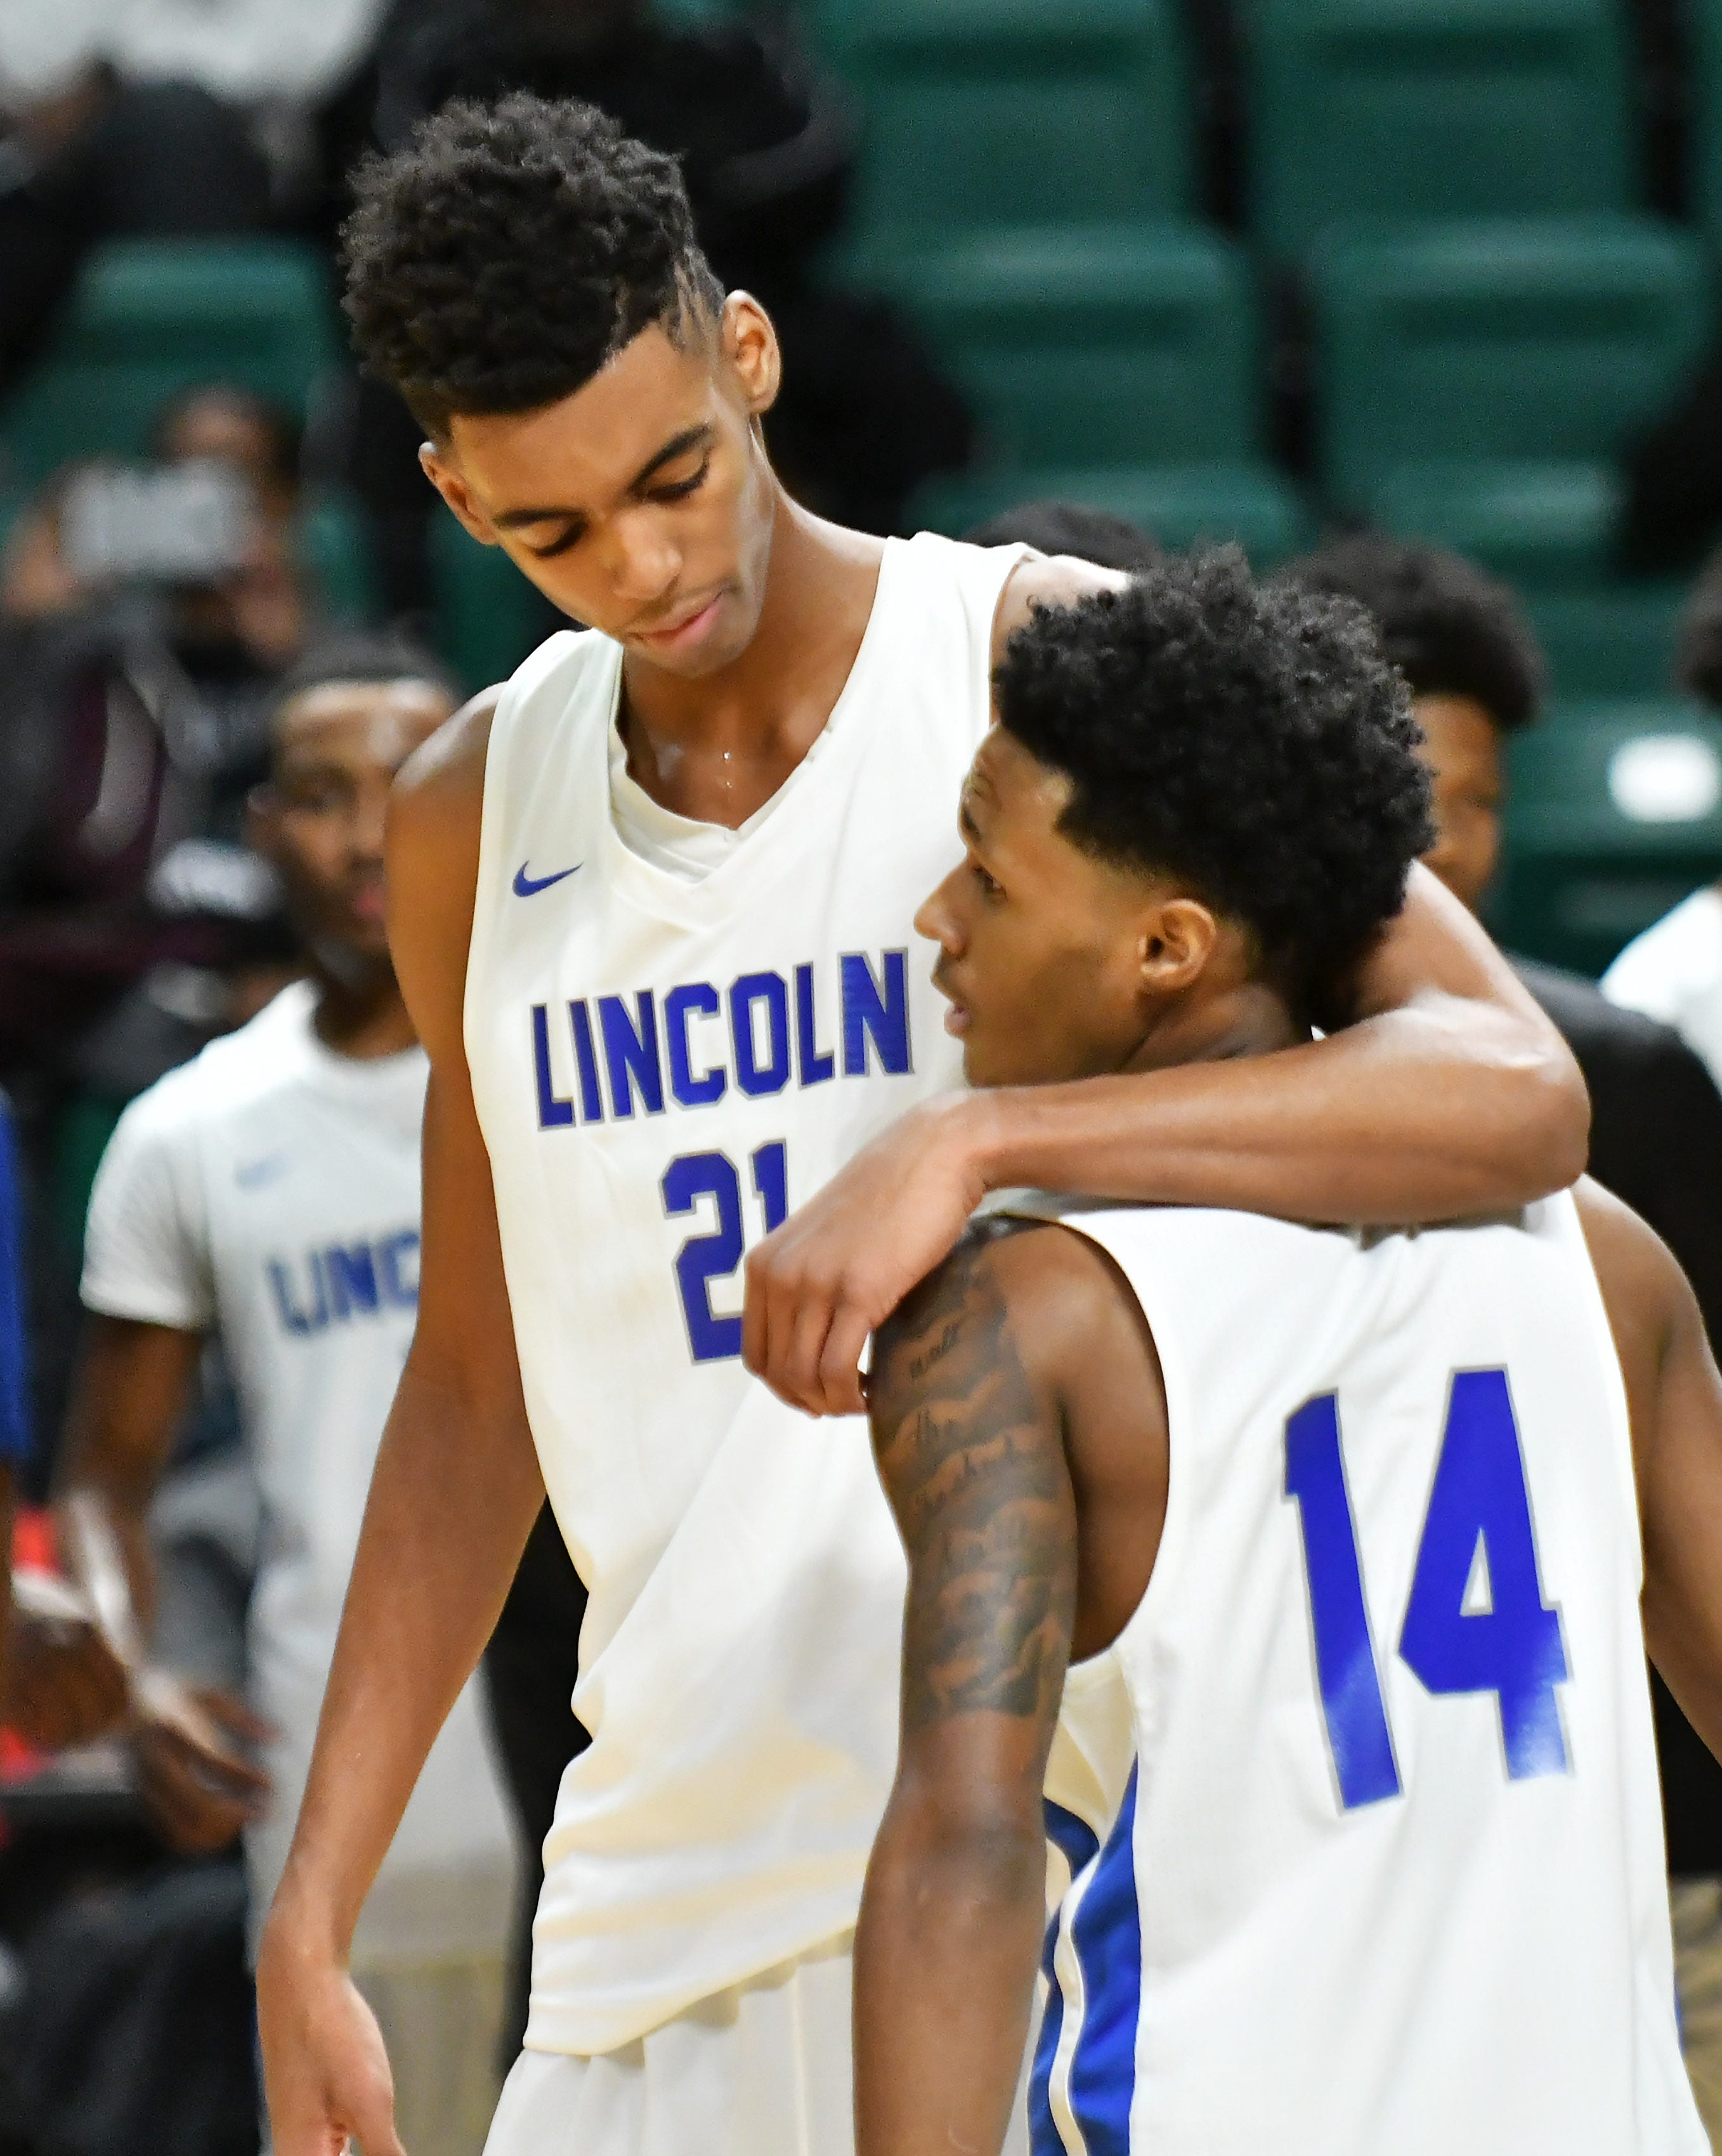 Lincoln's Emoni Bates (21) puts his arm around teammate Jalen Fisher during a game against Ann Arbor Huron High School at the EMU Convocation Center.